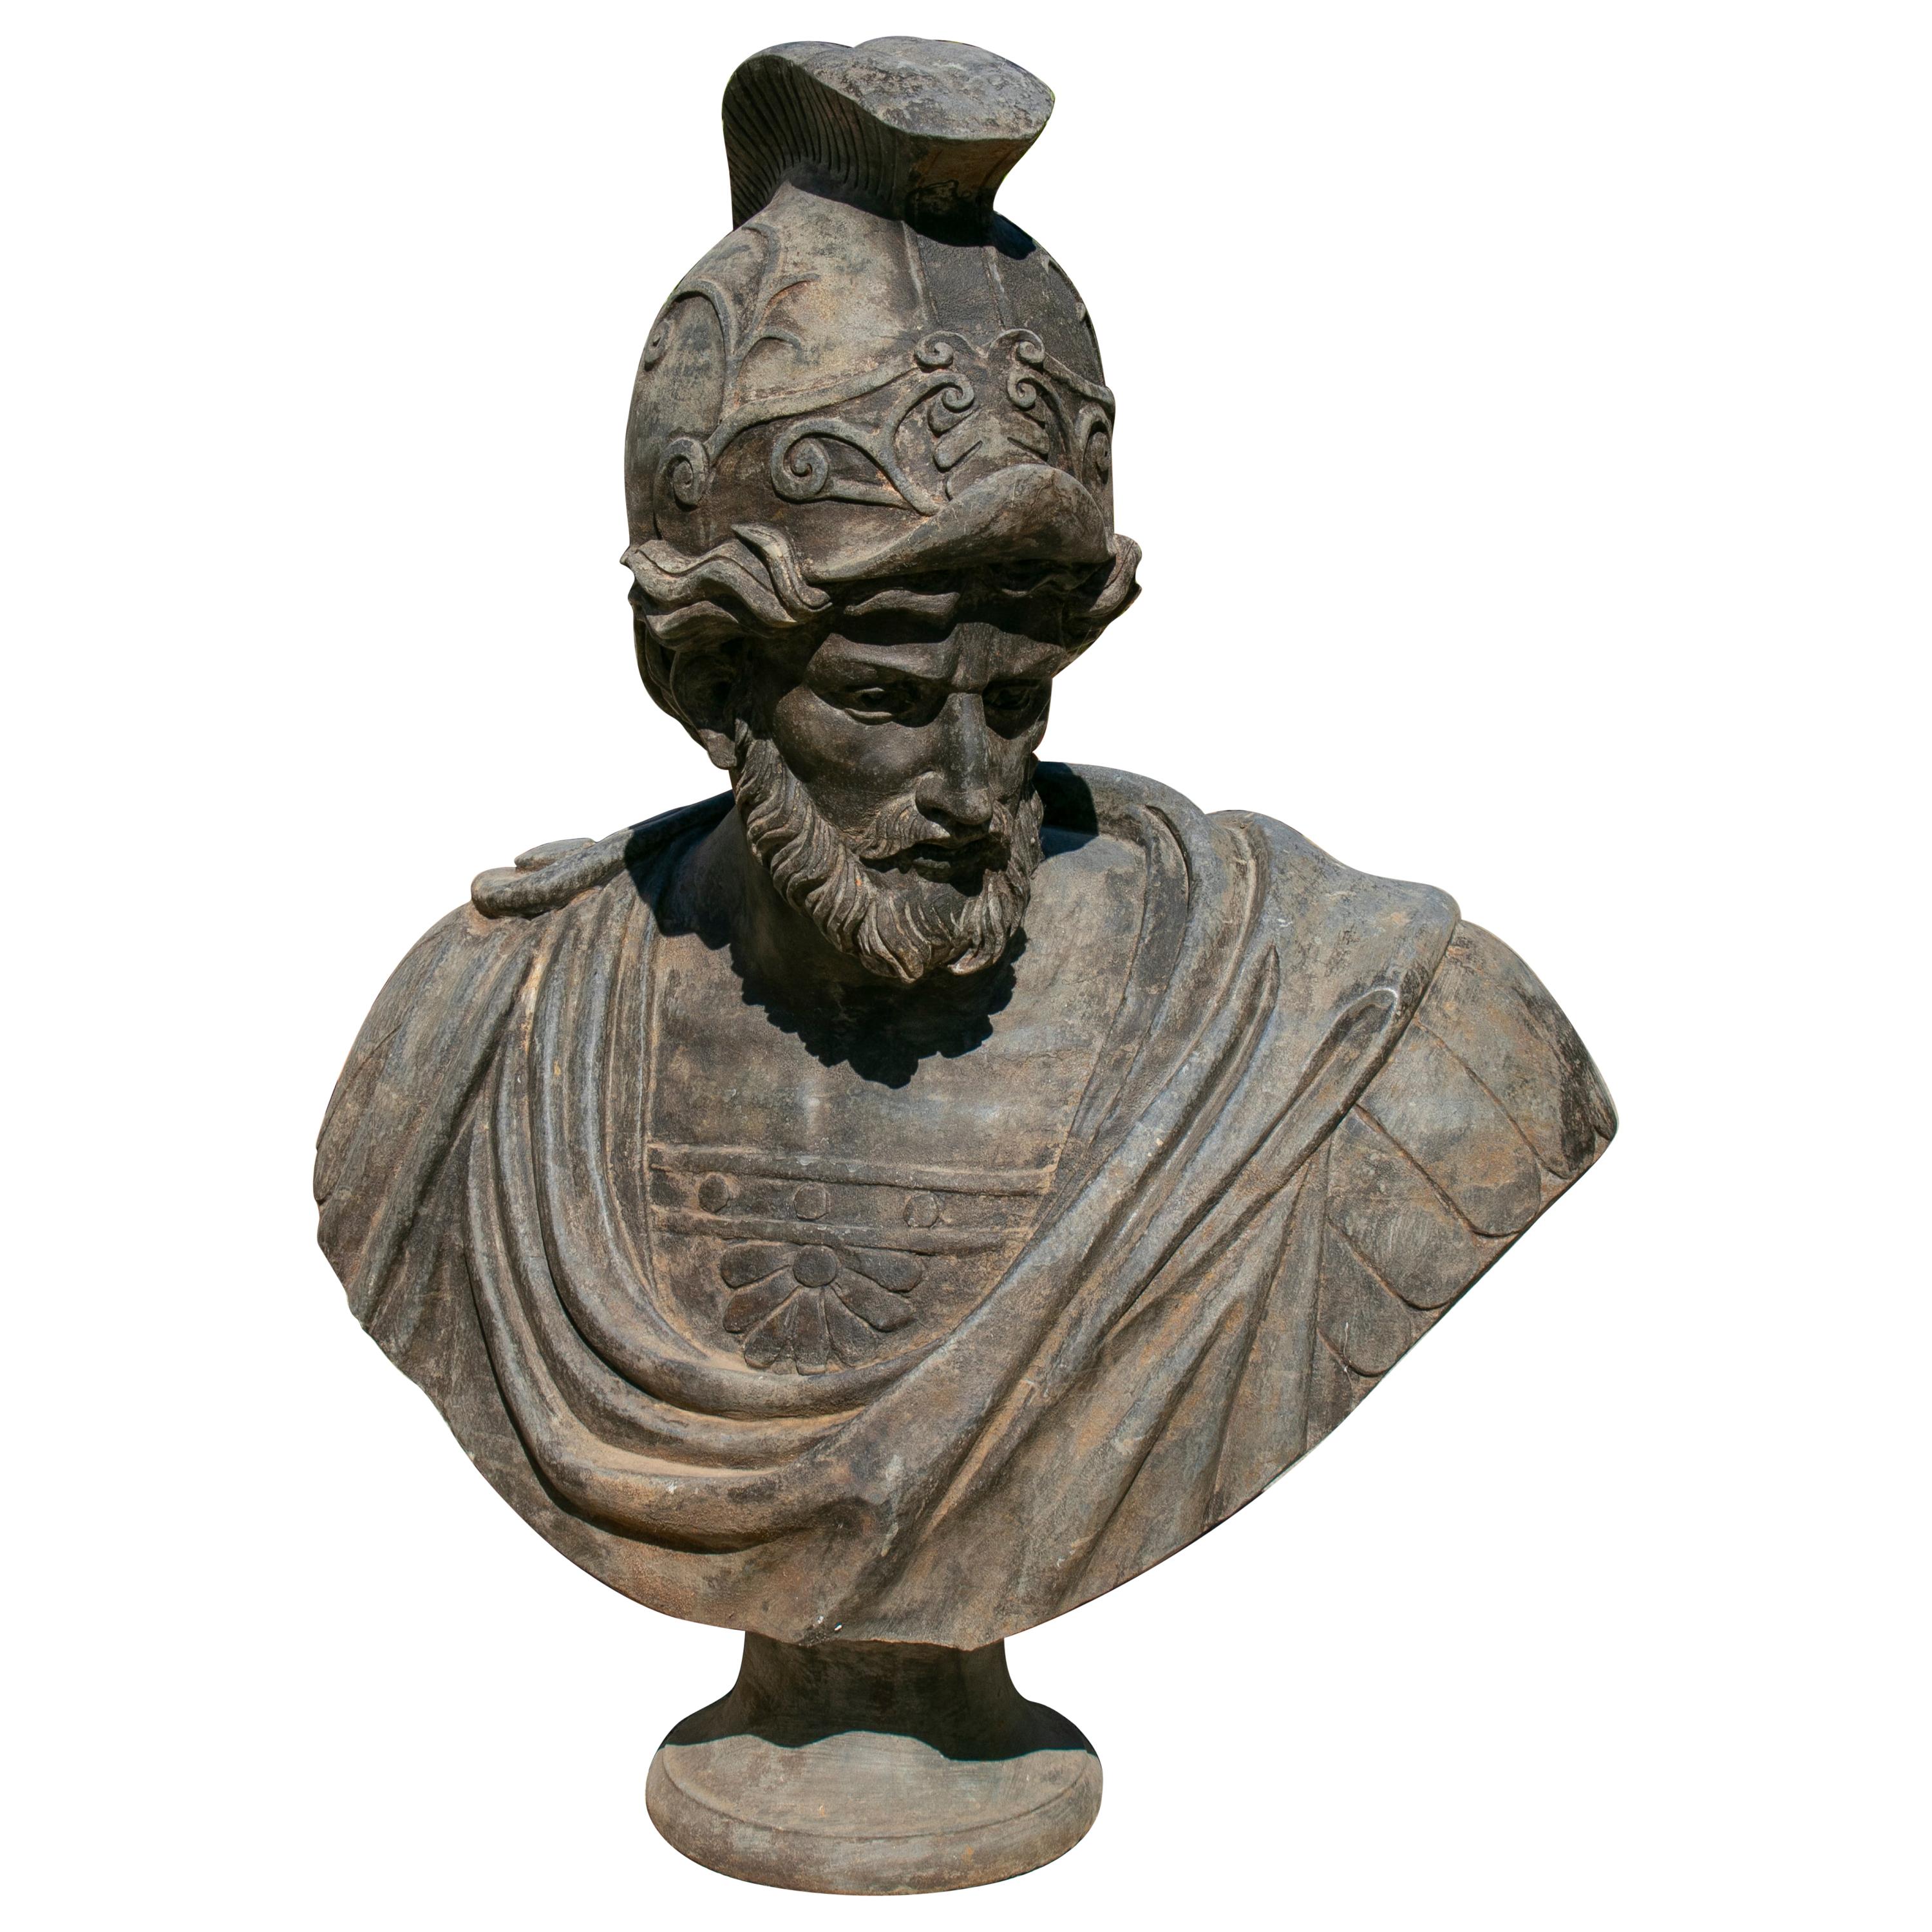 Hand Carved Aged Marble Bust of Roman General with Helmet and Toga